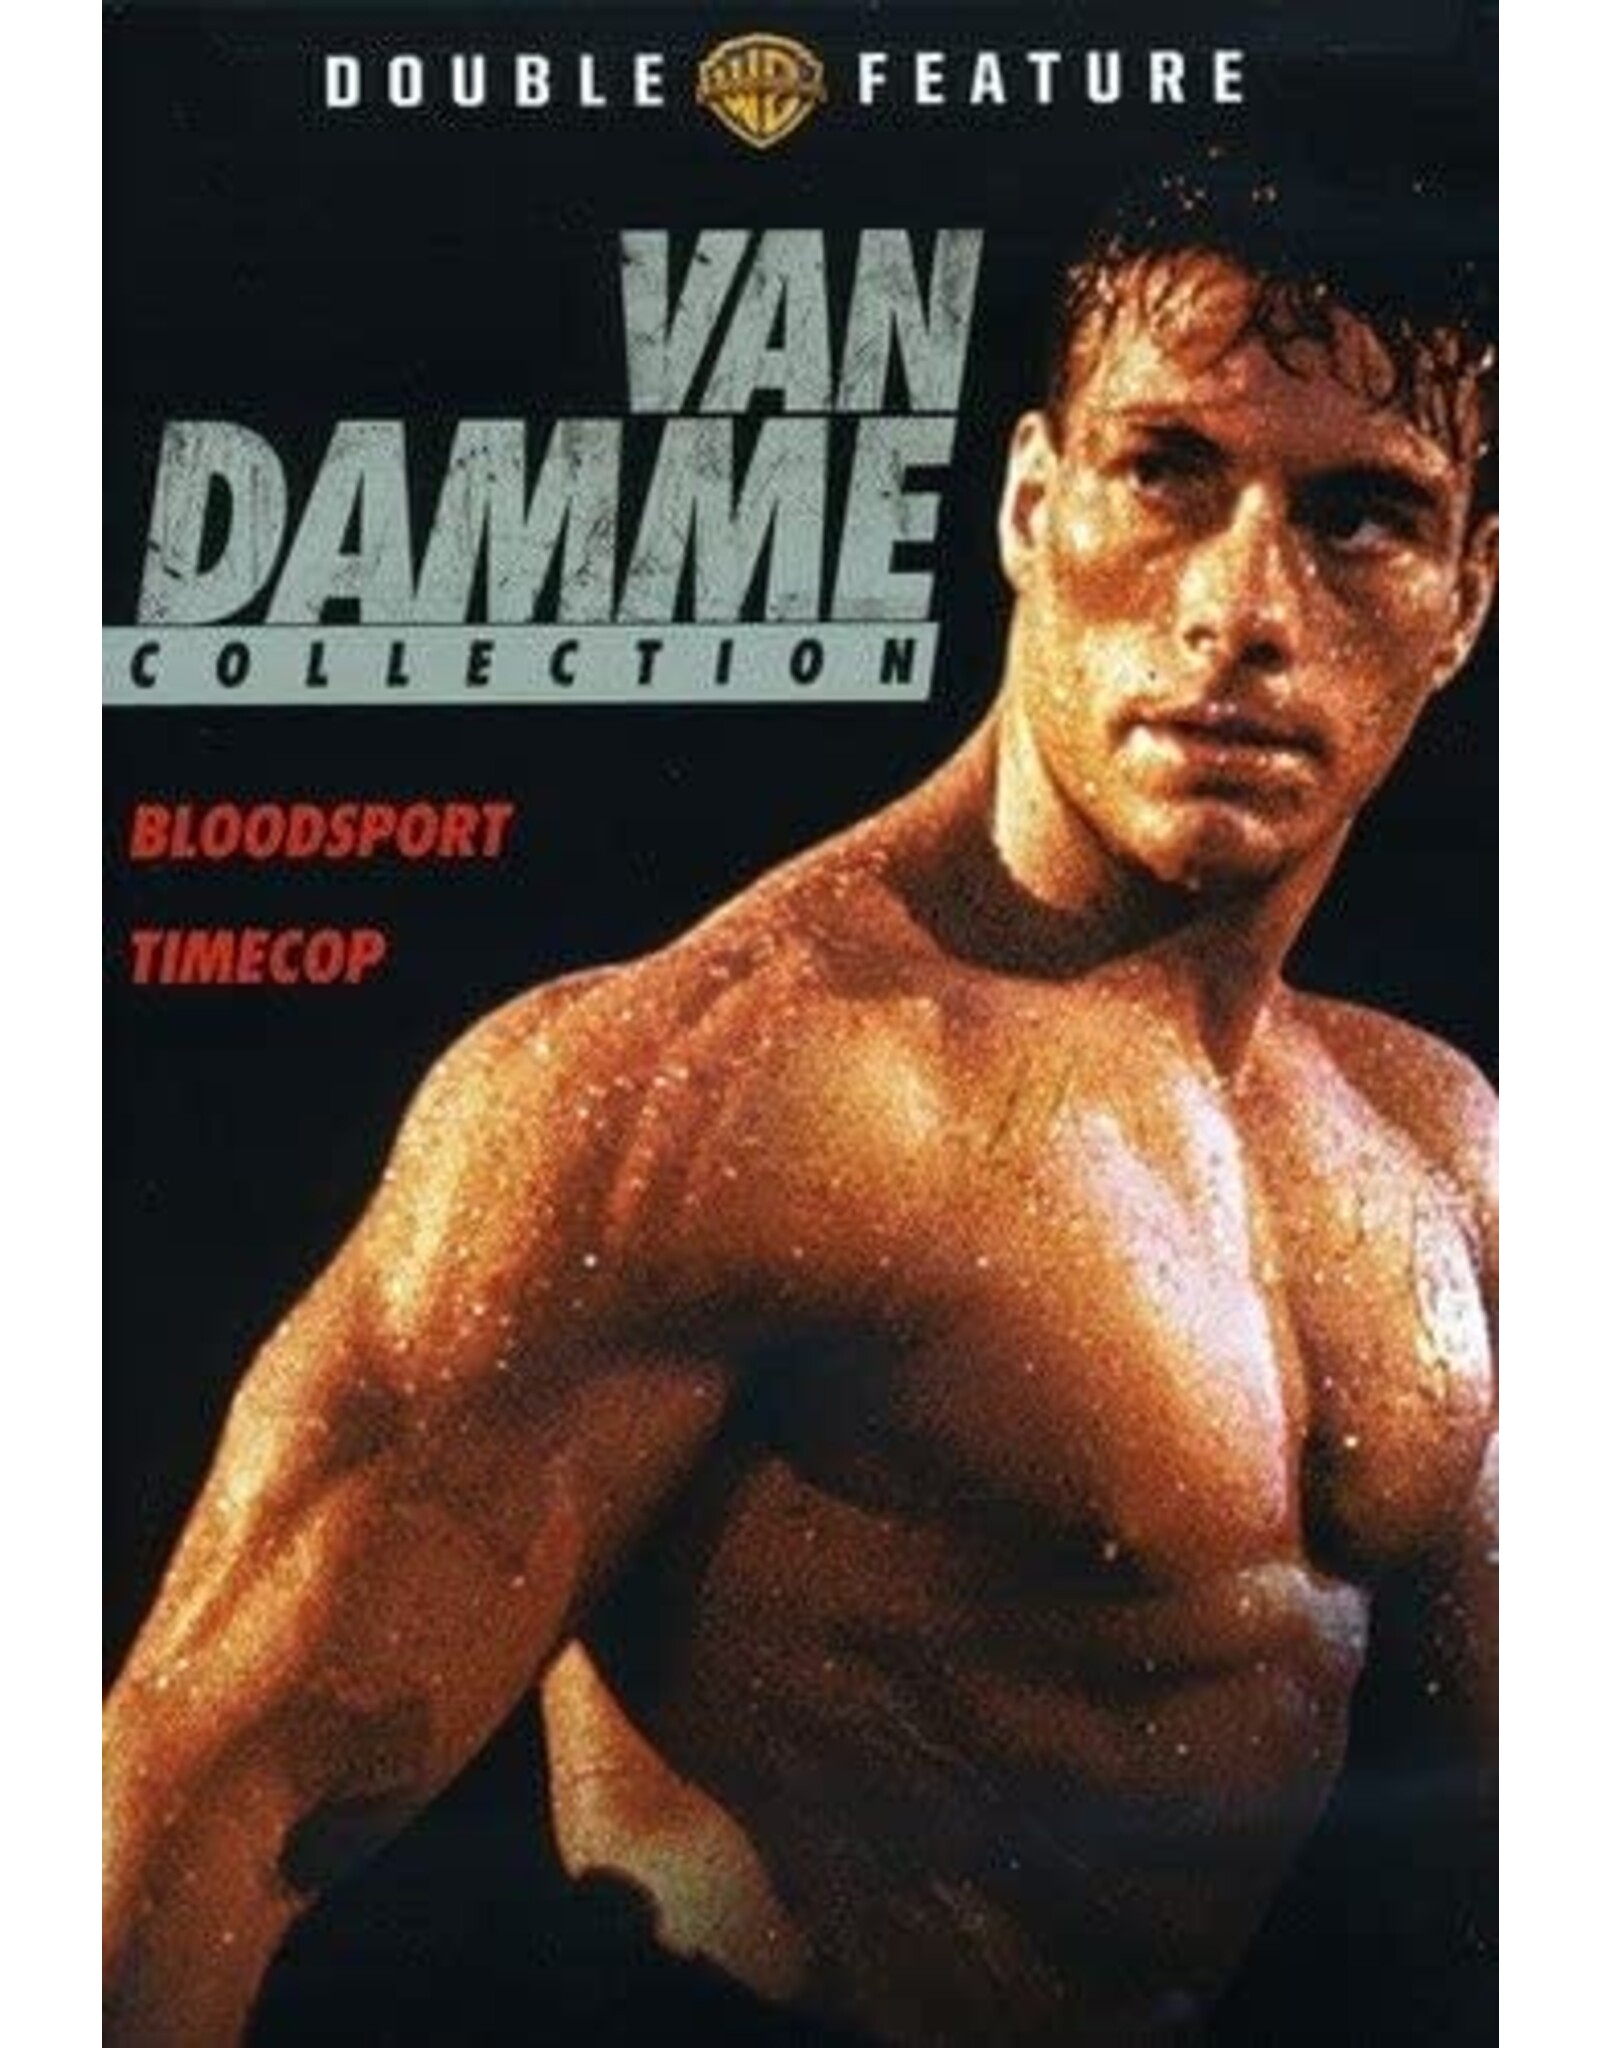 Cult & Cool Bloodsport / Timecop Van Damme Collection (Used)